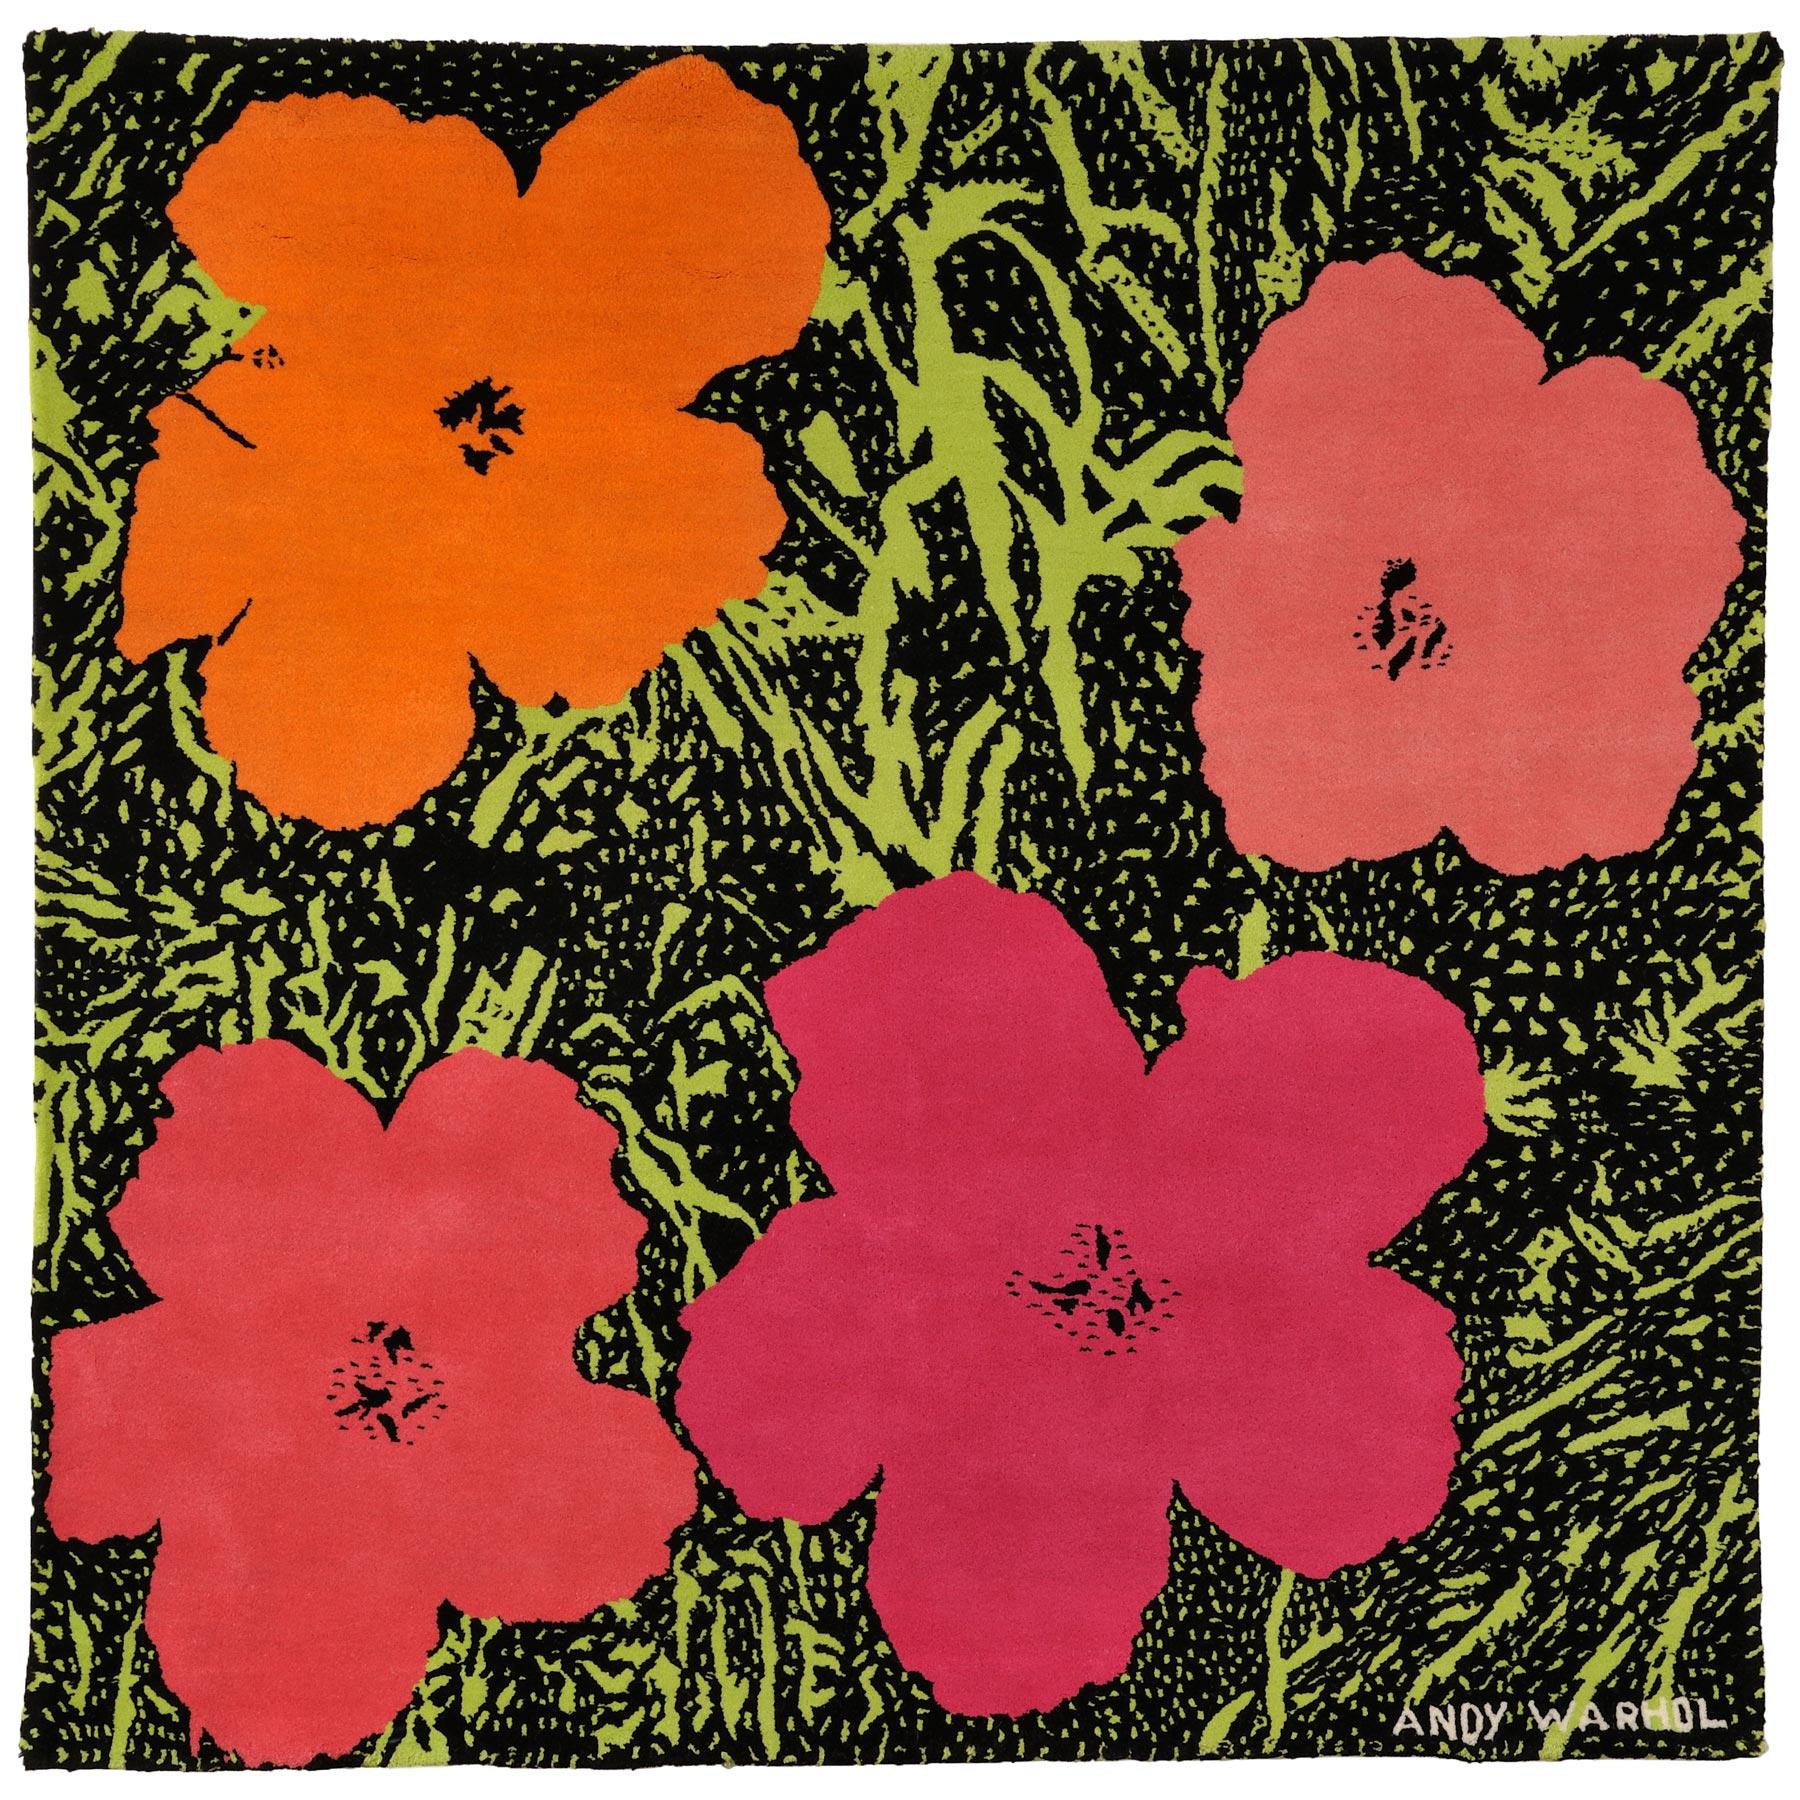 (After) Andy Warhol
Flowers, 1968
Hand Woven Wool Tapestry
183 x 183 cm (72 x 72 in)
Edition of 20
With the knotted name ‘ANDY WARHOL’ lower right and the embroidered annotation ‘WARHOL ©’ on the reverse
Published by Modern Master Tapestries,